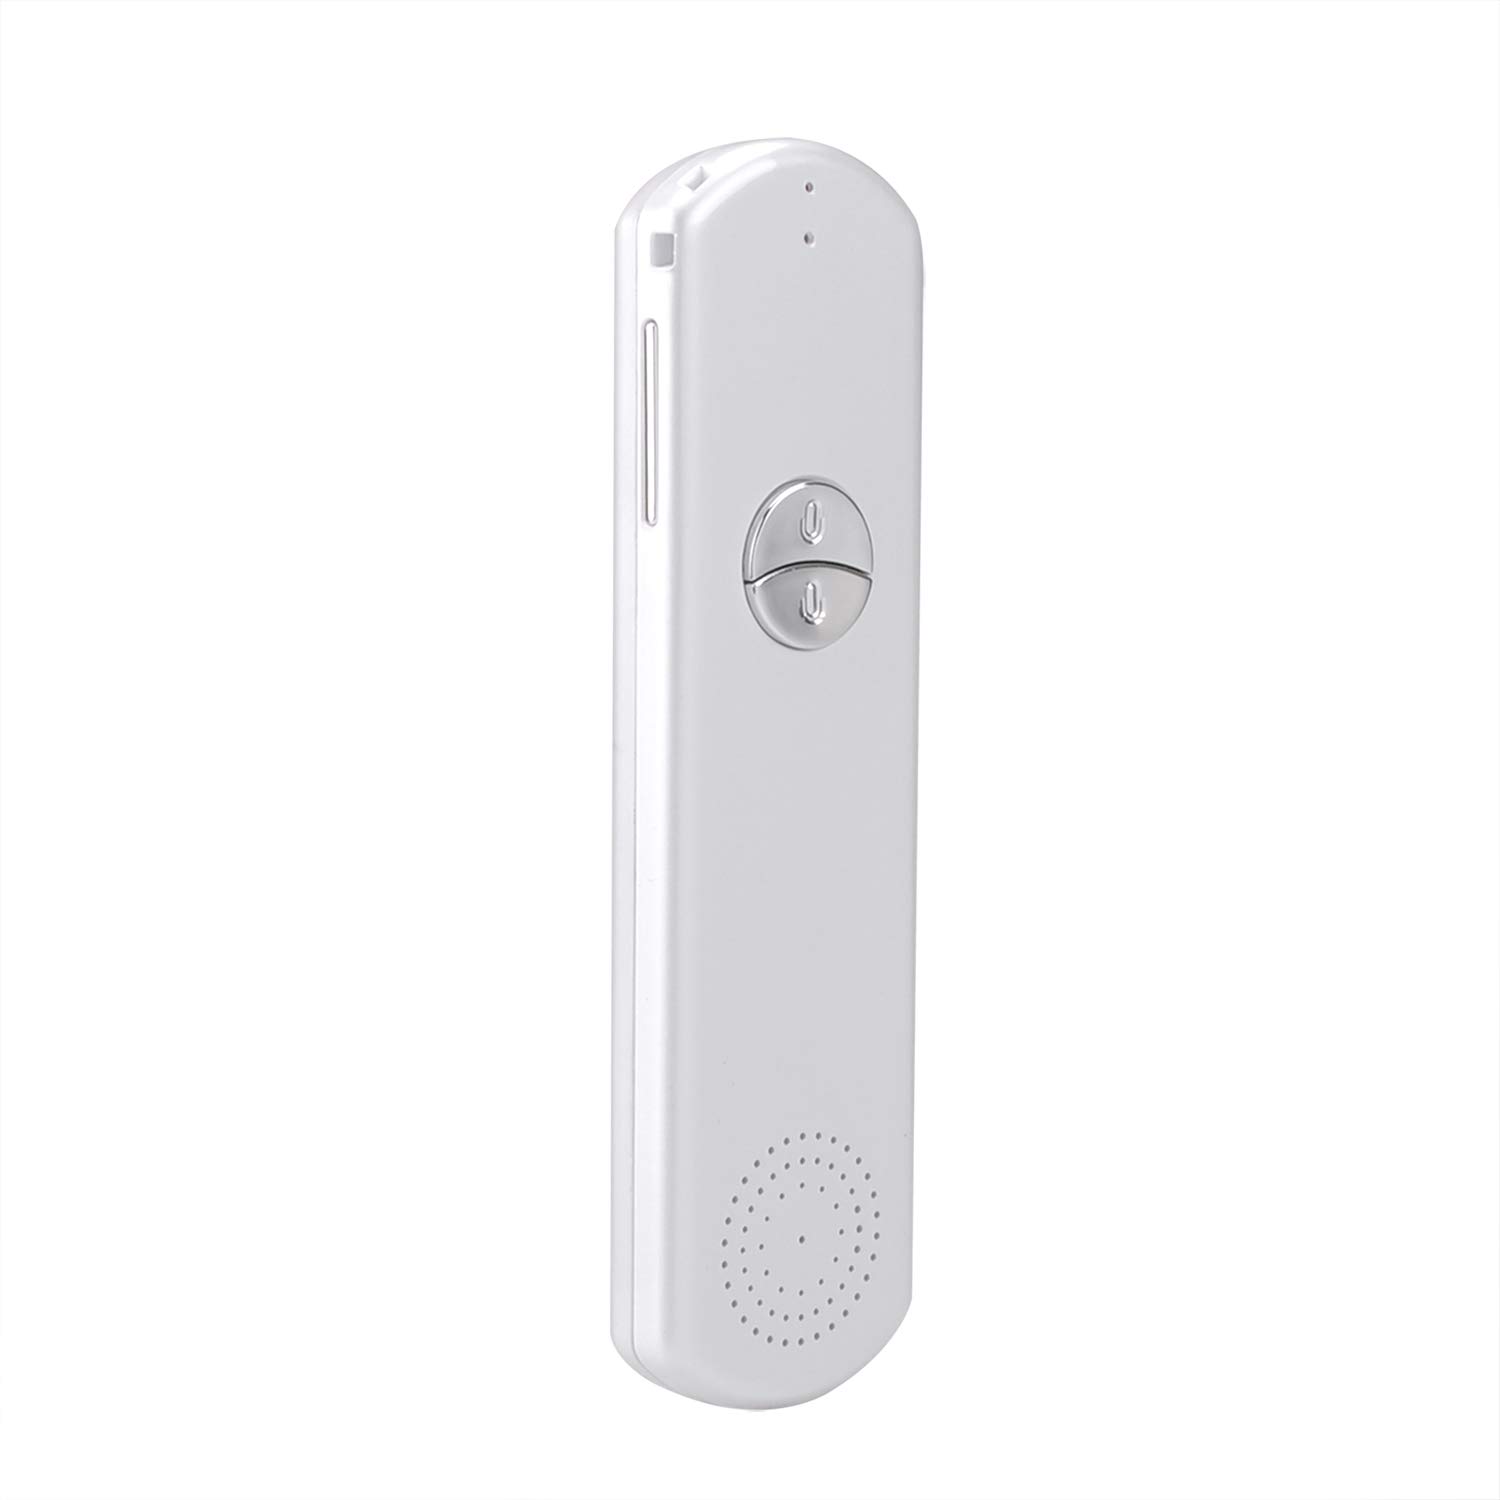 Two Way Easy Trans Smart Language Translator Device Electronic Pocket Voice Bluetooth 52 Languages for Meeting Learning Travel Shopping Business Fit for Apple iPhone Android White (WIFI/3G/4G/5G)